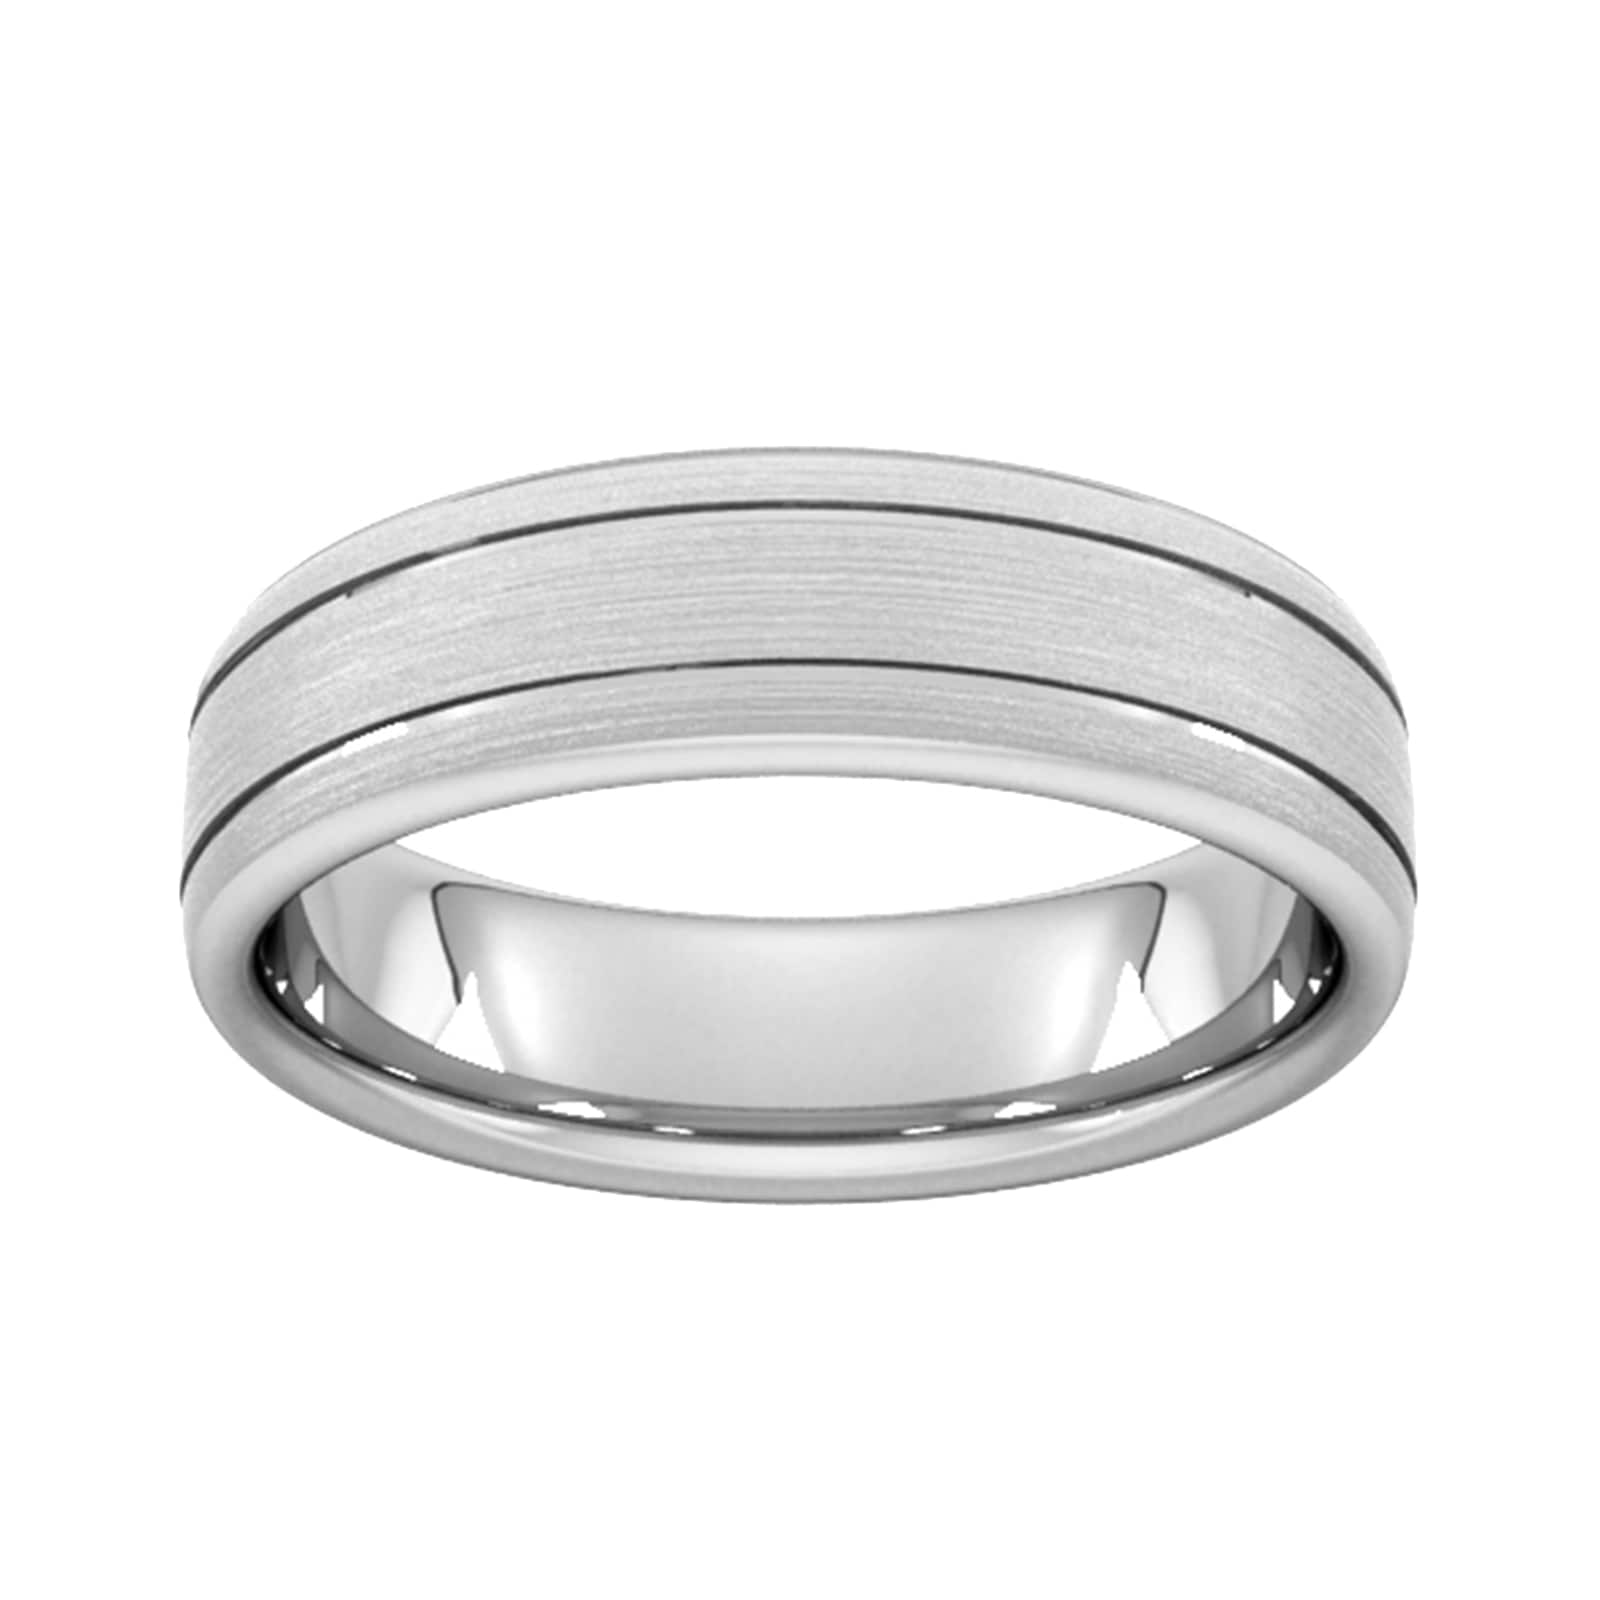 6mm Slight Court Heavy Matt Finish With Double Grooves Wedding Ring In 950 Palladium - Ring Size W